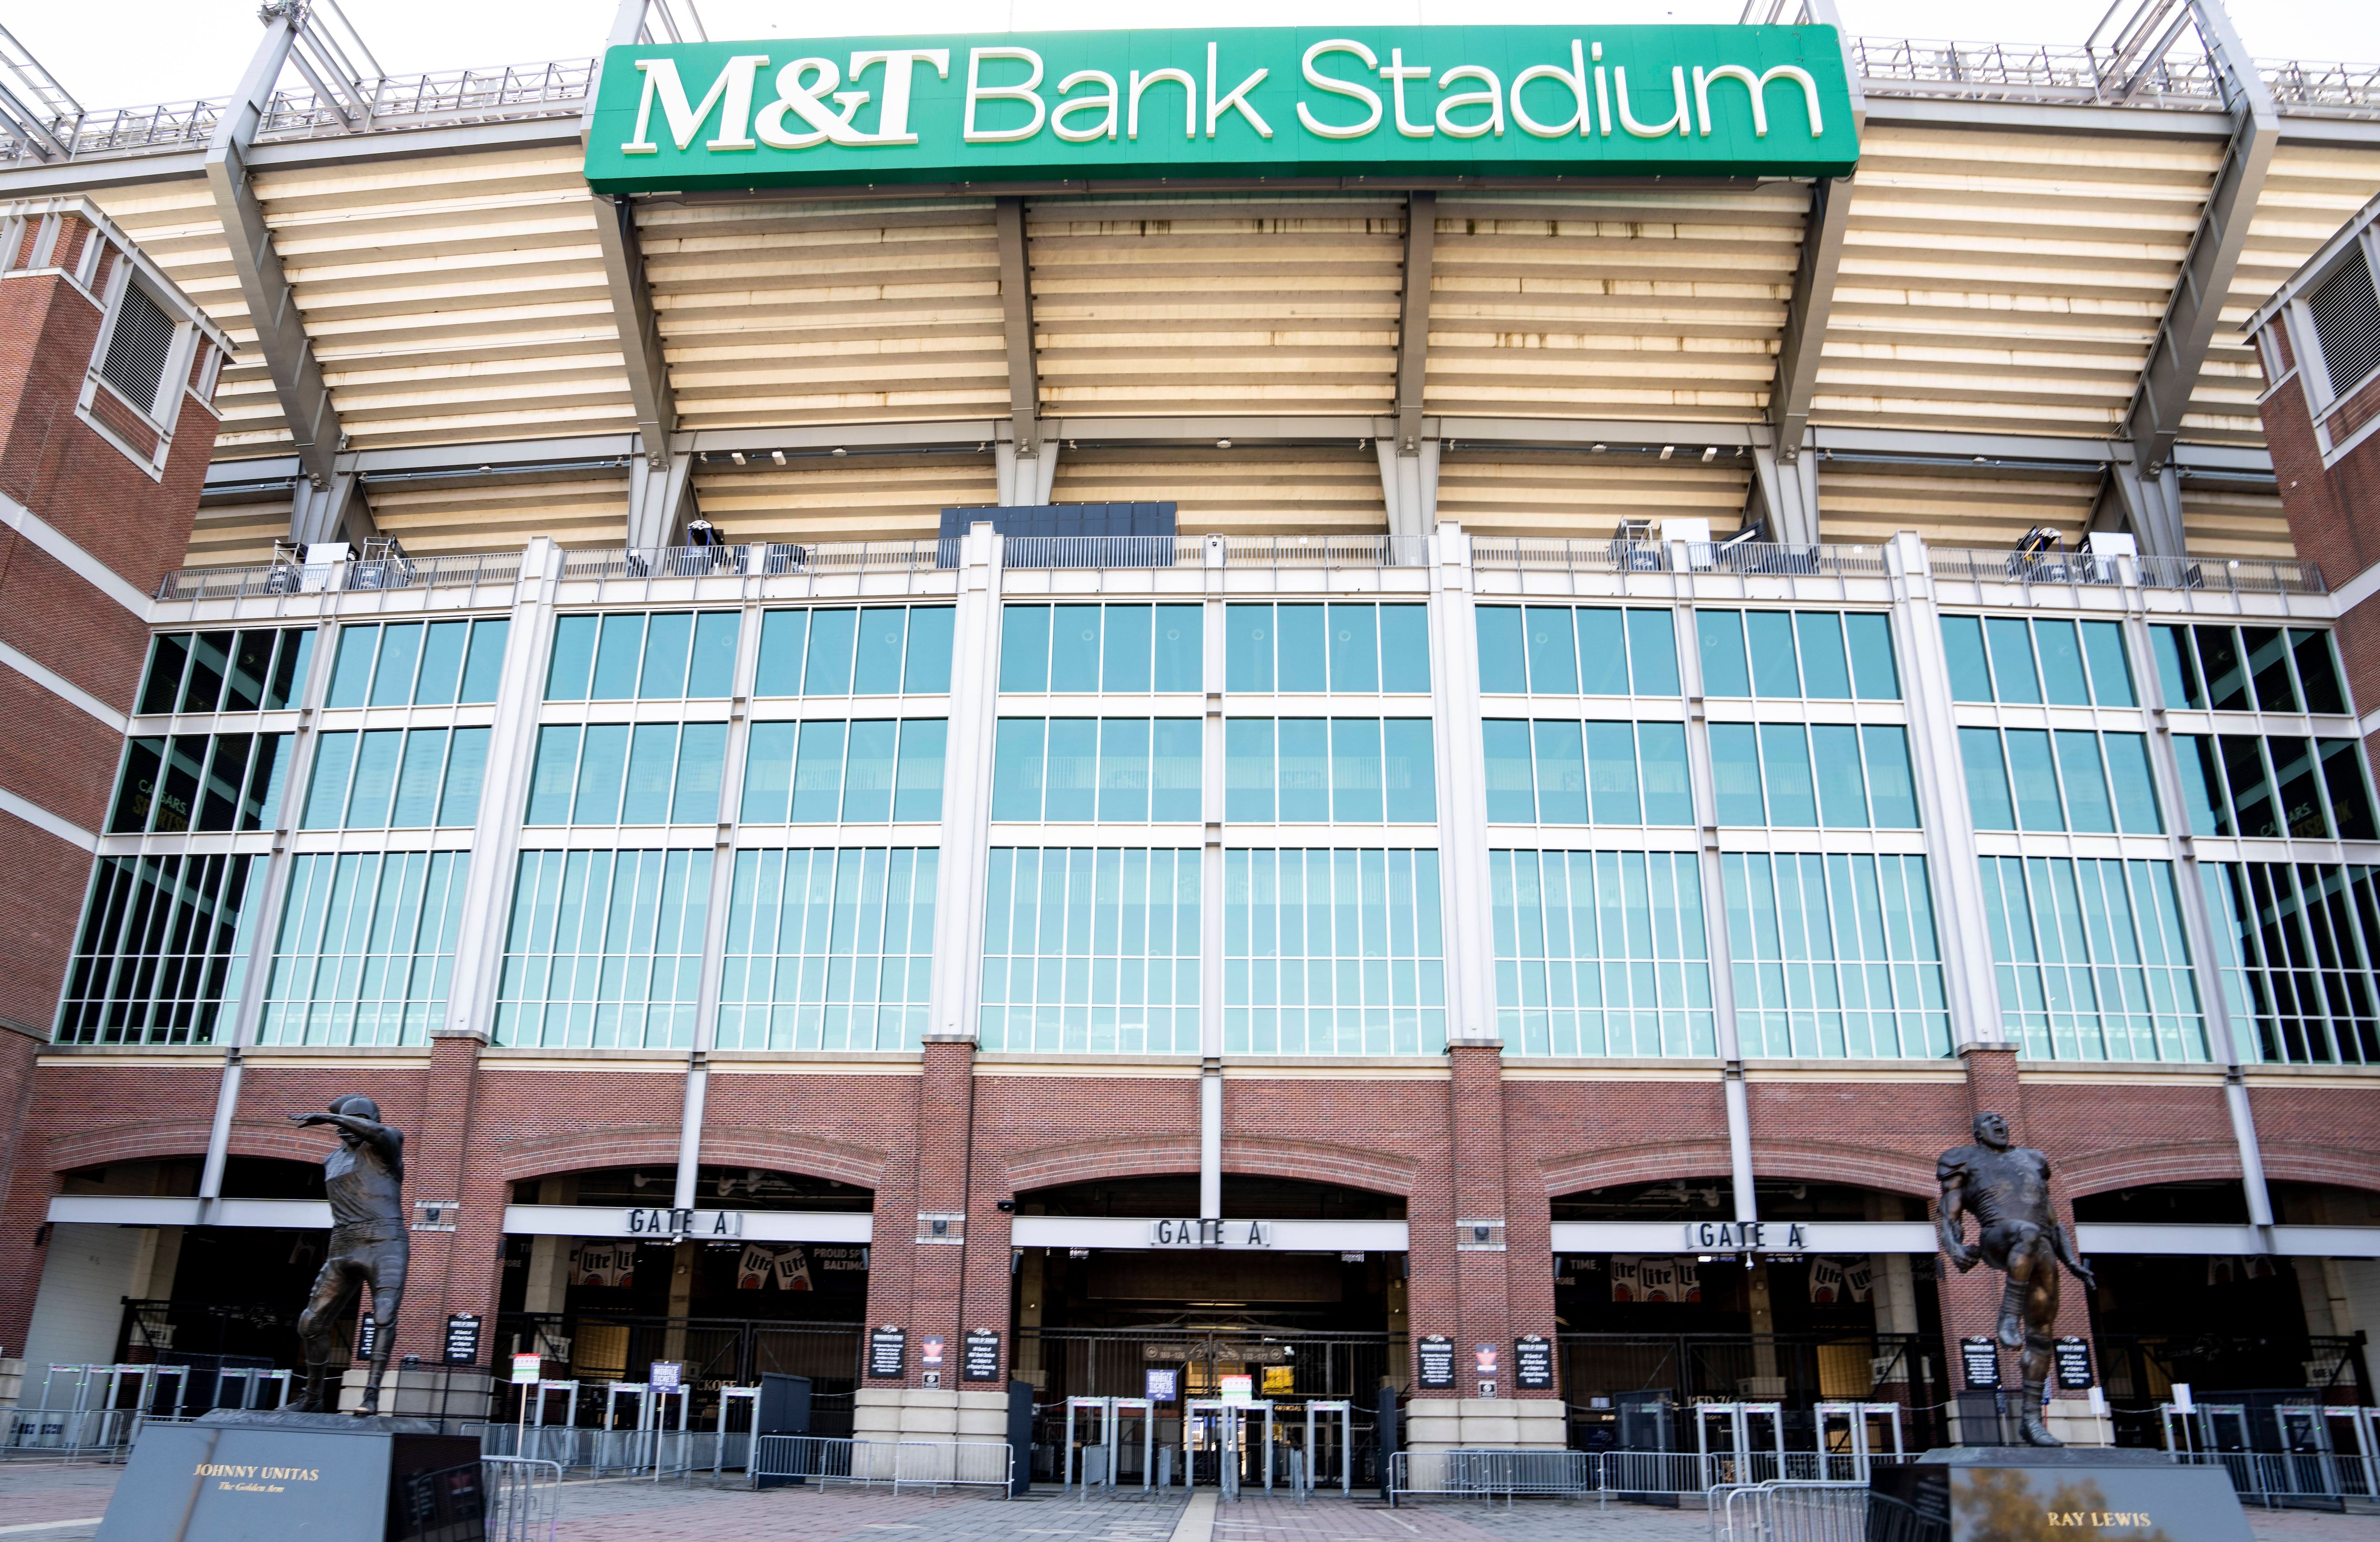 M&T Bank Stadium in Baltimore, MD, Friday, October 14, 2022.